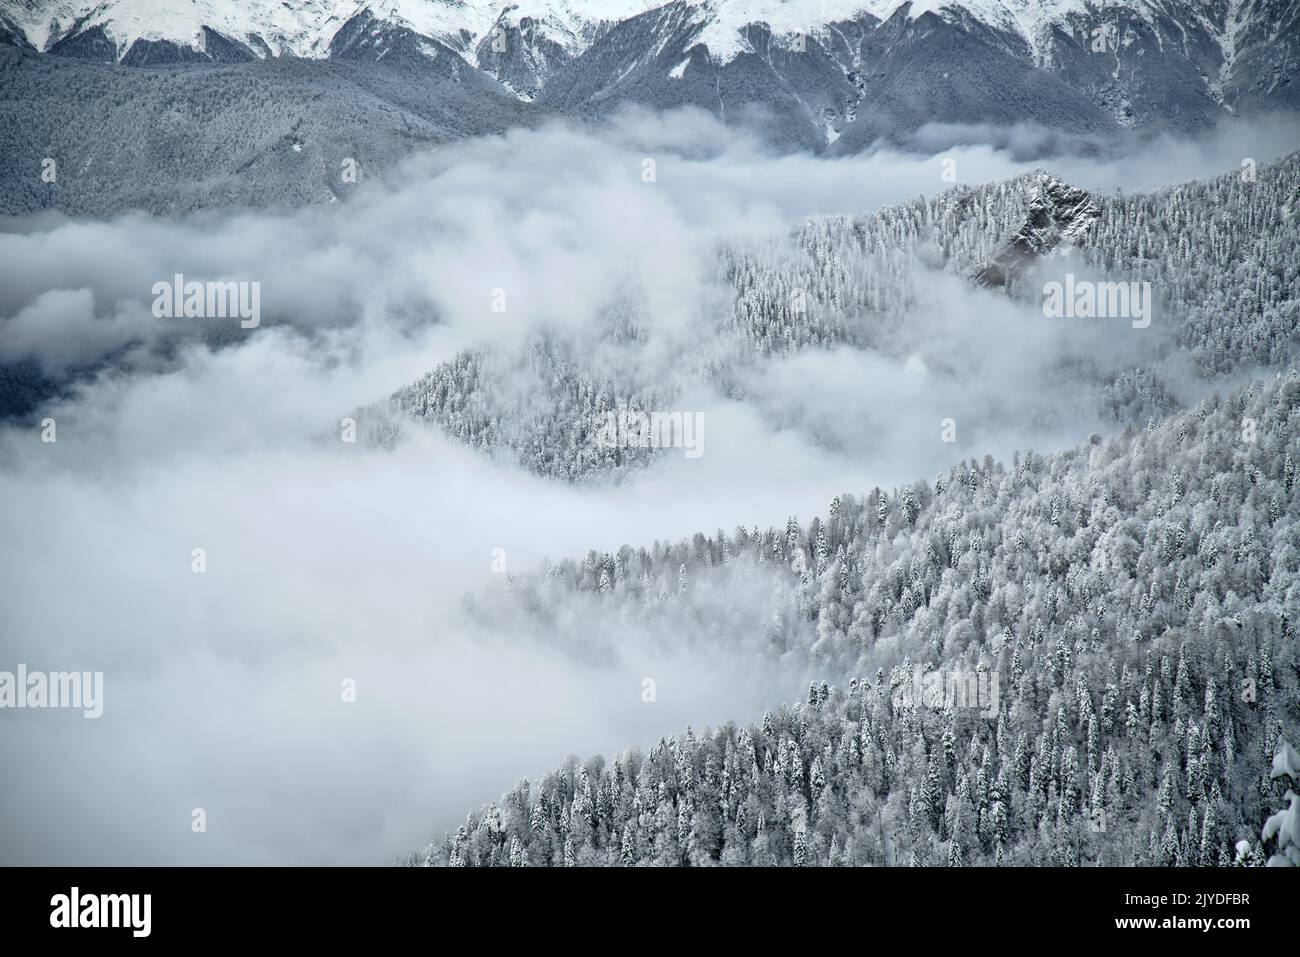 Snow-covered mountain forest, cloud-forest belt. Oriental spruce (Picea orientalis). Clouds covered the valley, mountain peaks are visible (plexus of Stock Photo